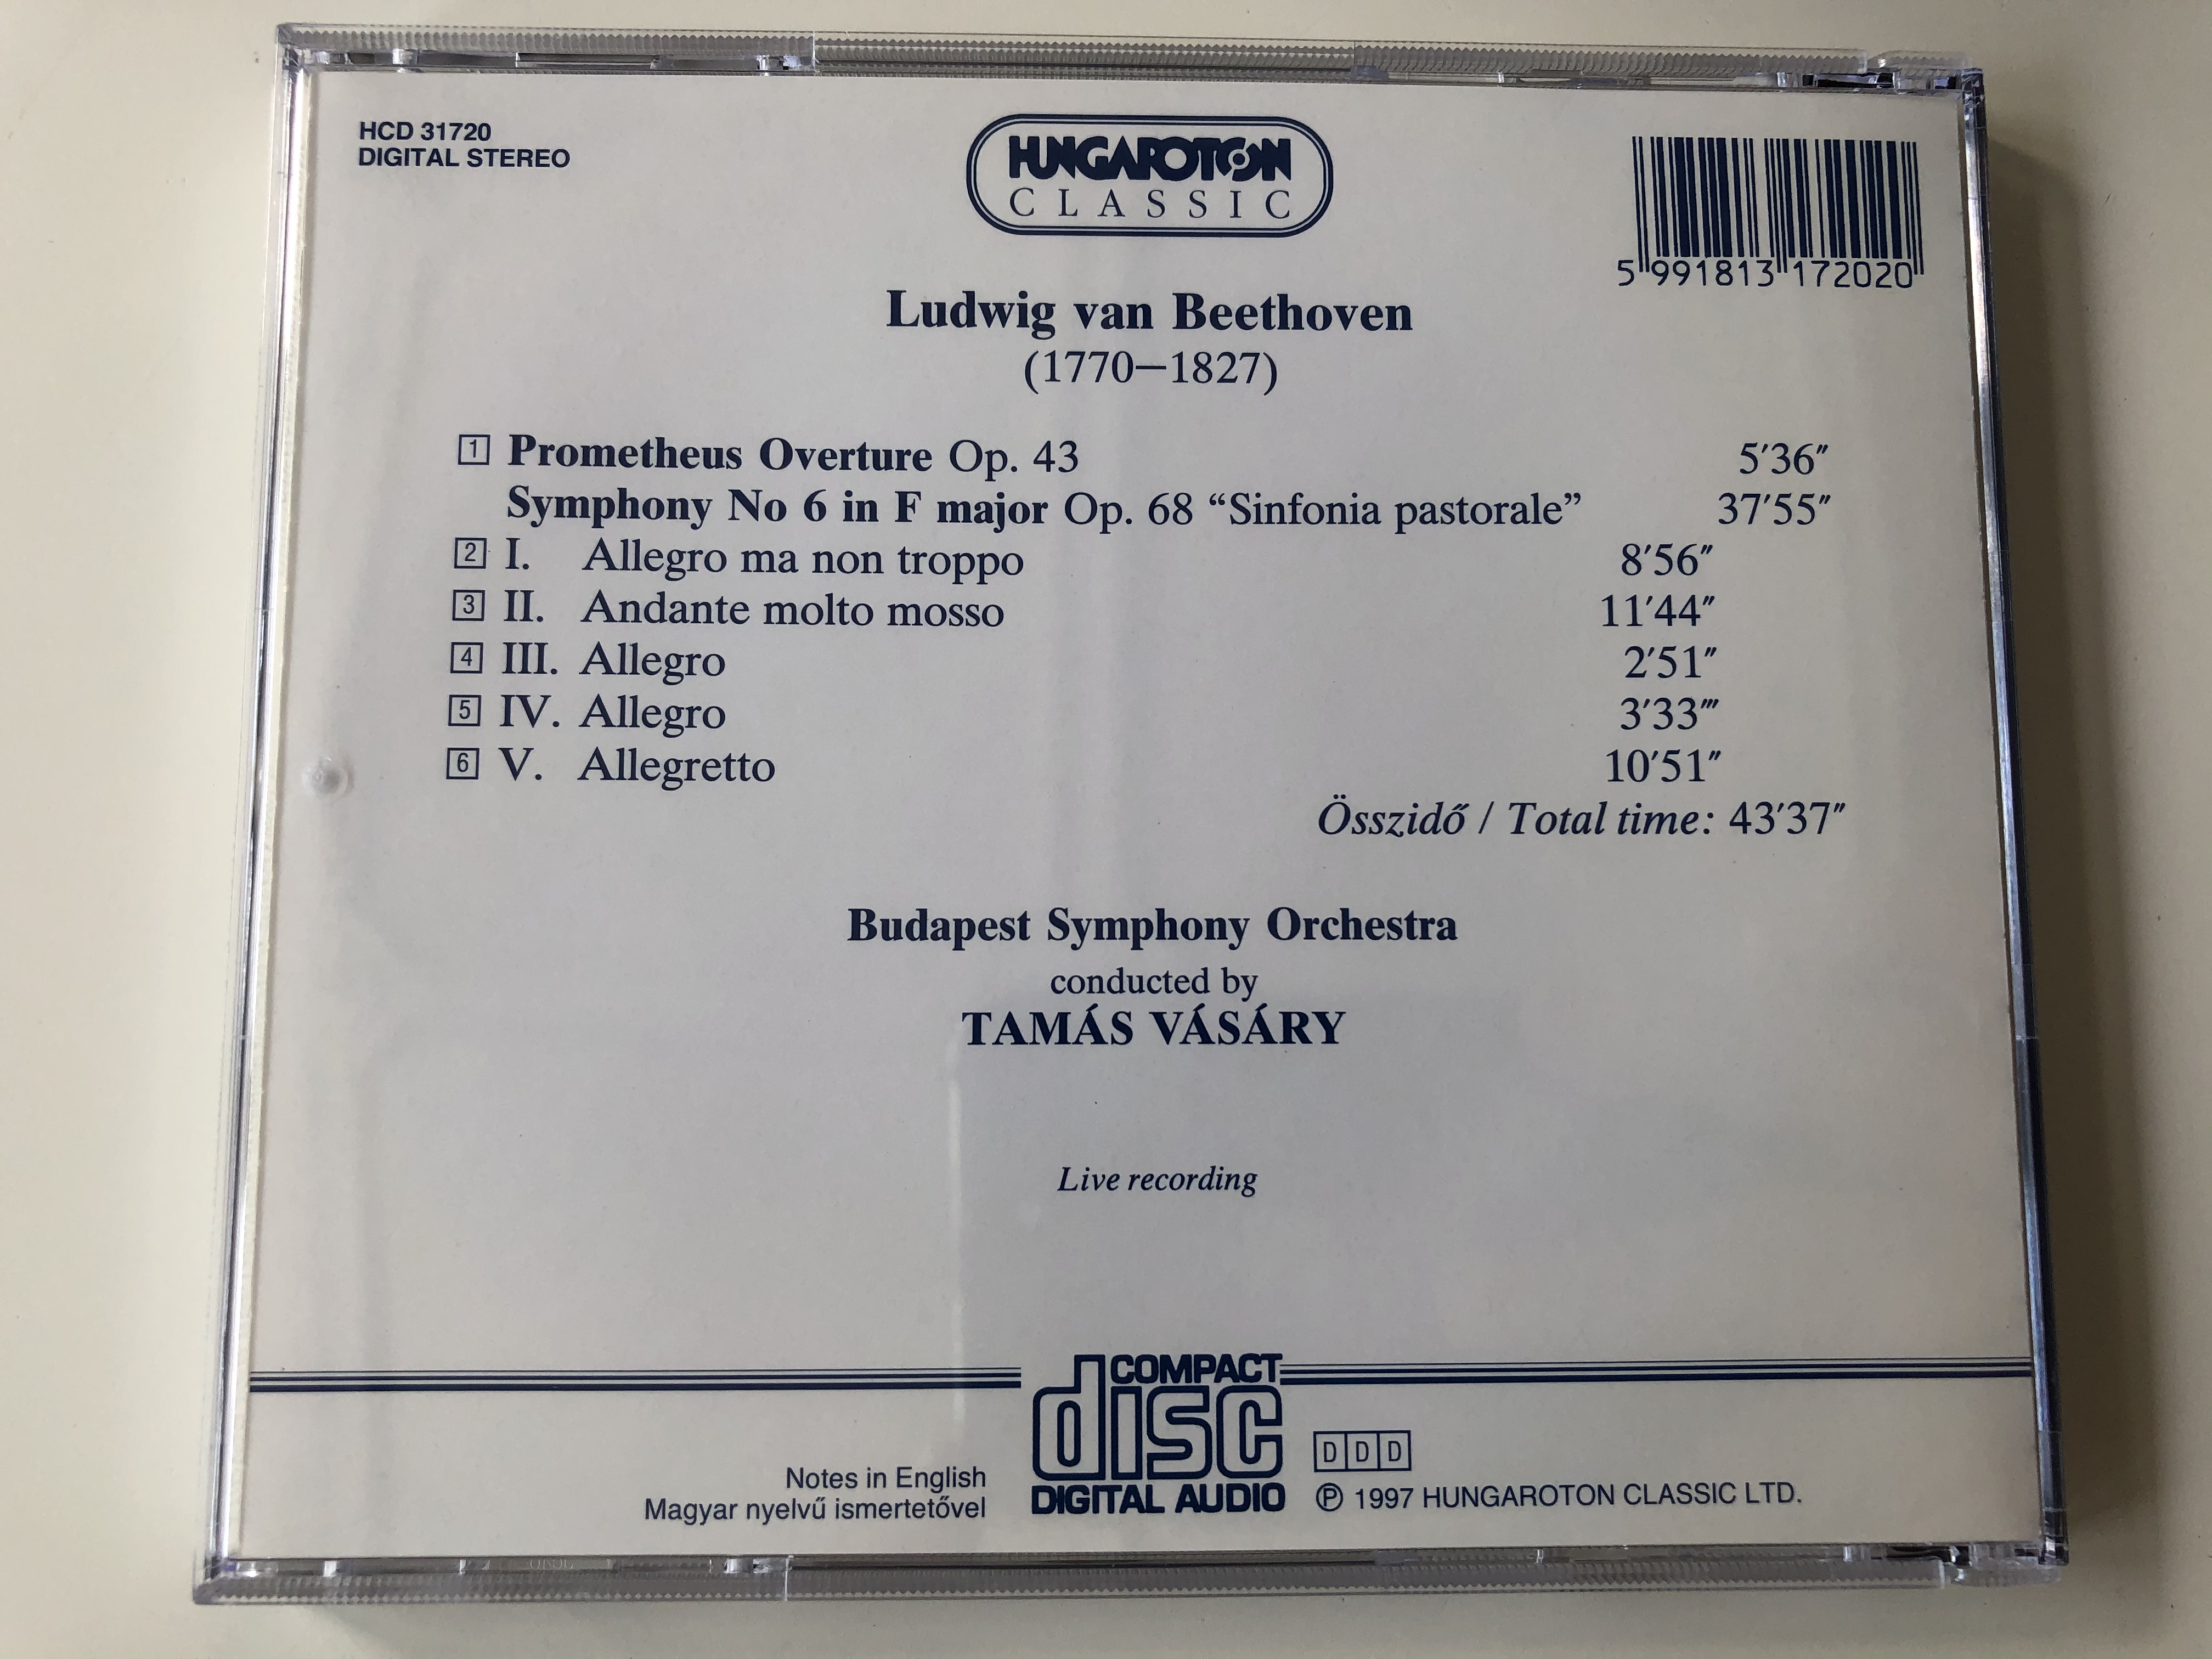 beethoven-symphony-no.-6-pastorale-prometheus-overture-budapest-symphony-orchestra-conducted-by-tamas-vasary-live-recording-hungaroton-classic-audio-cd-1997-stereo-hcd-31720-7-.jpg